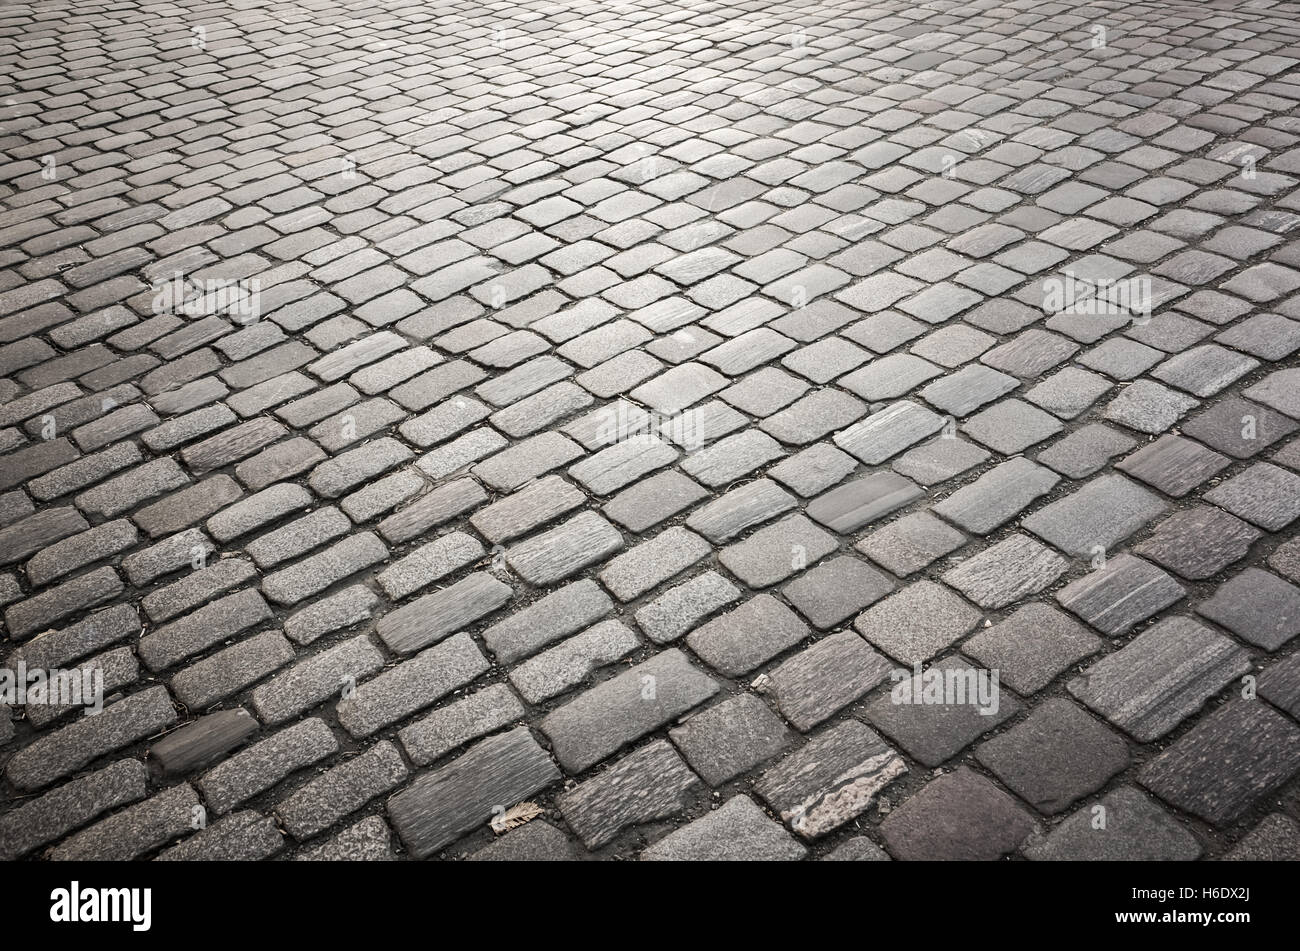 Dark gray cobble road, stone street pavement, background photo with selective focus Stock Photo